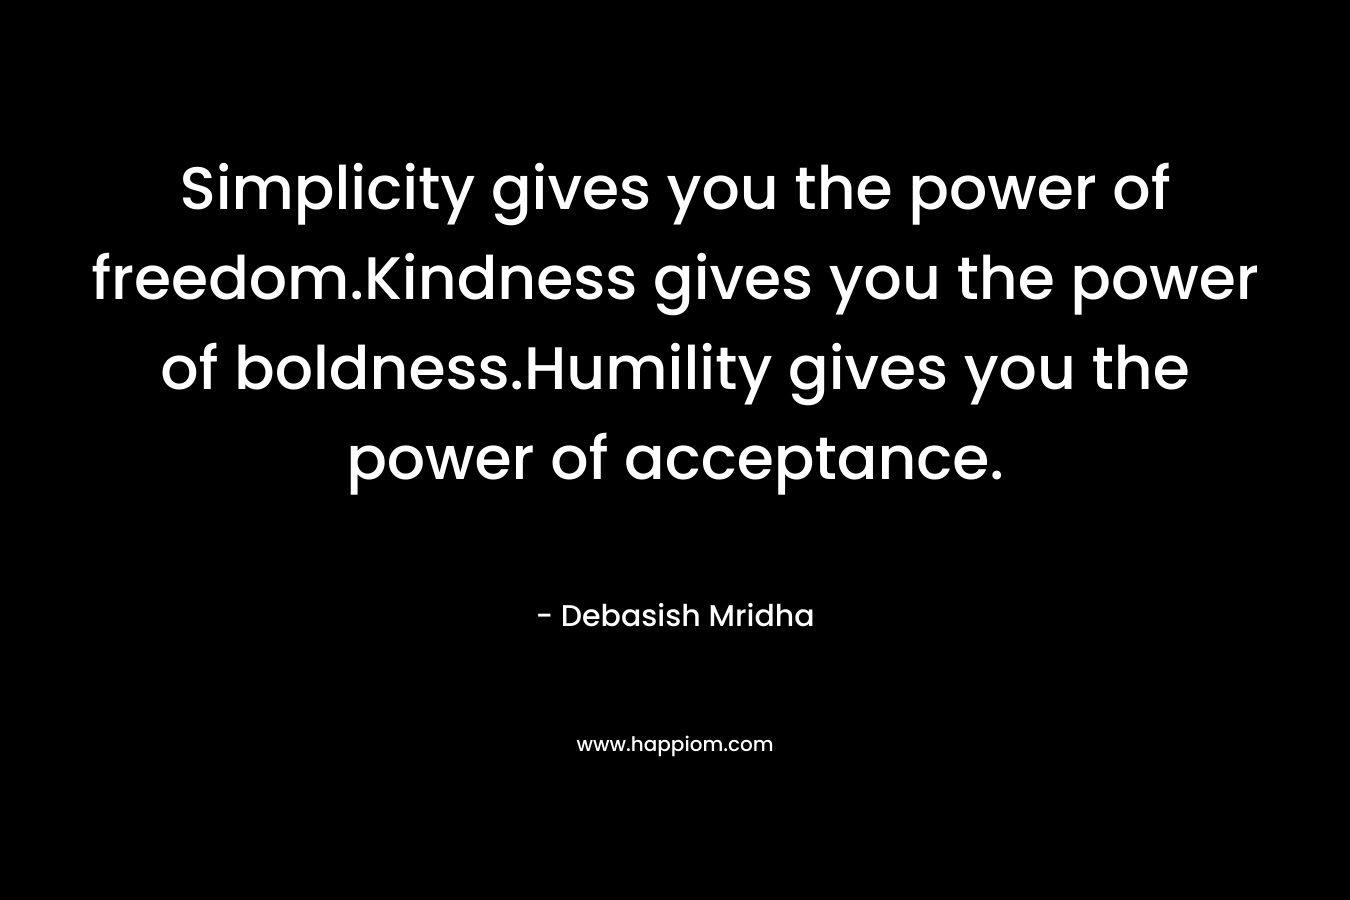 Simplicity gives you the power of freedom.Kindness gives you the power of boldness.Humility gives you the power of acceptance.